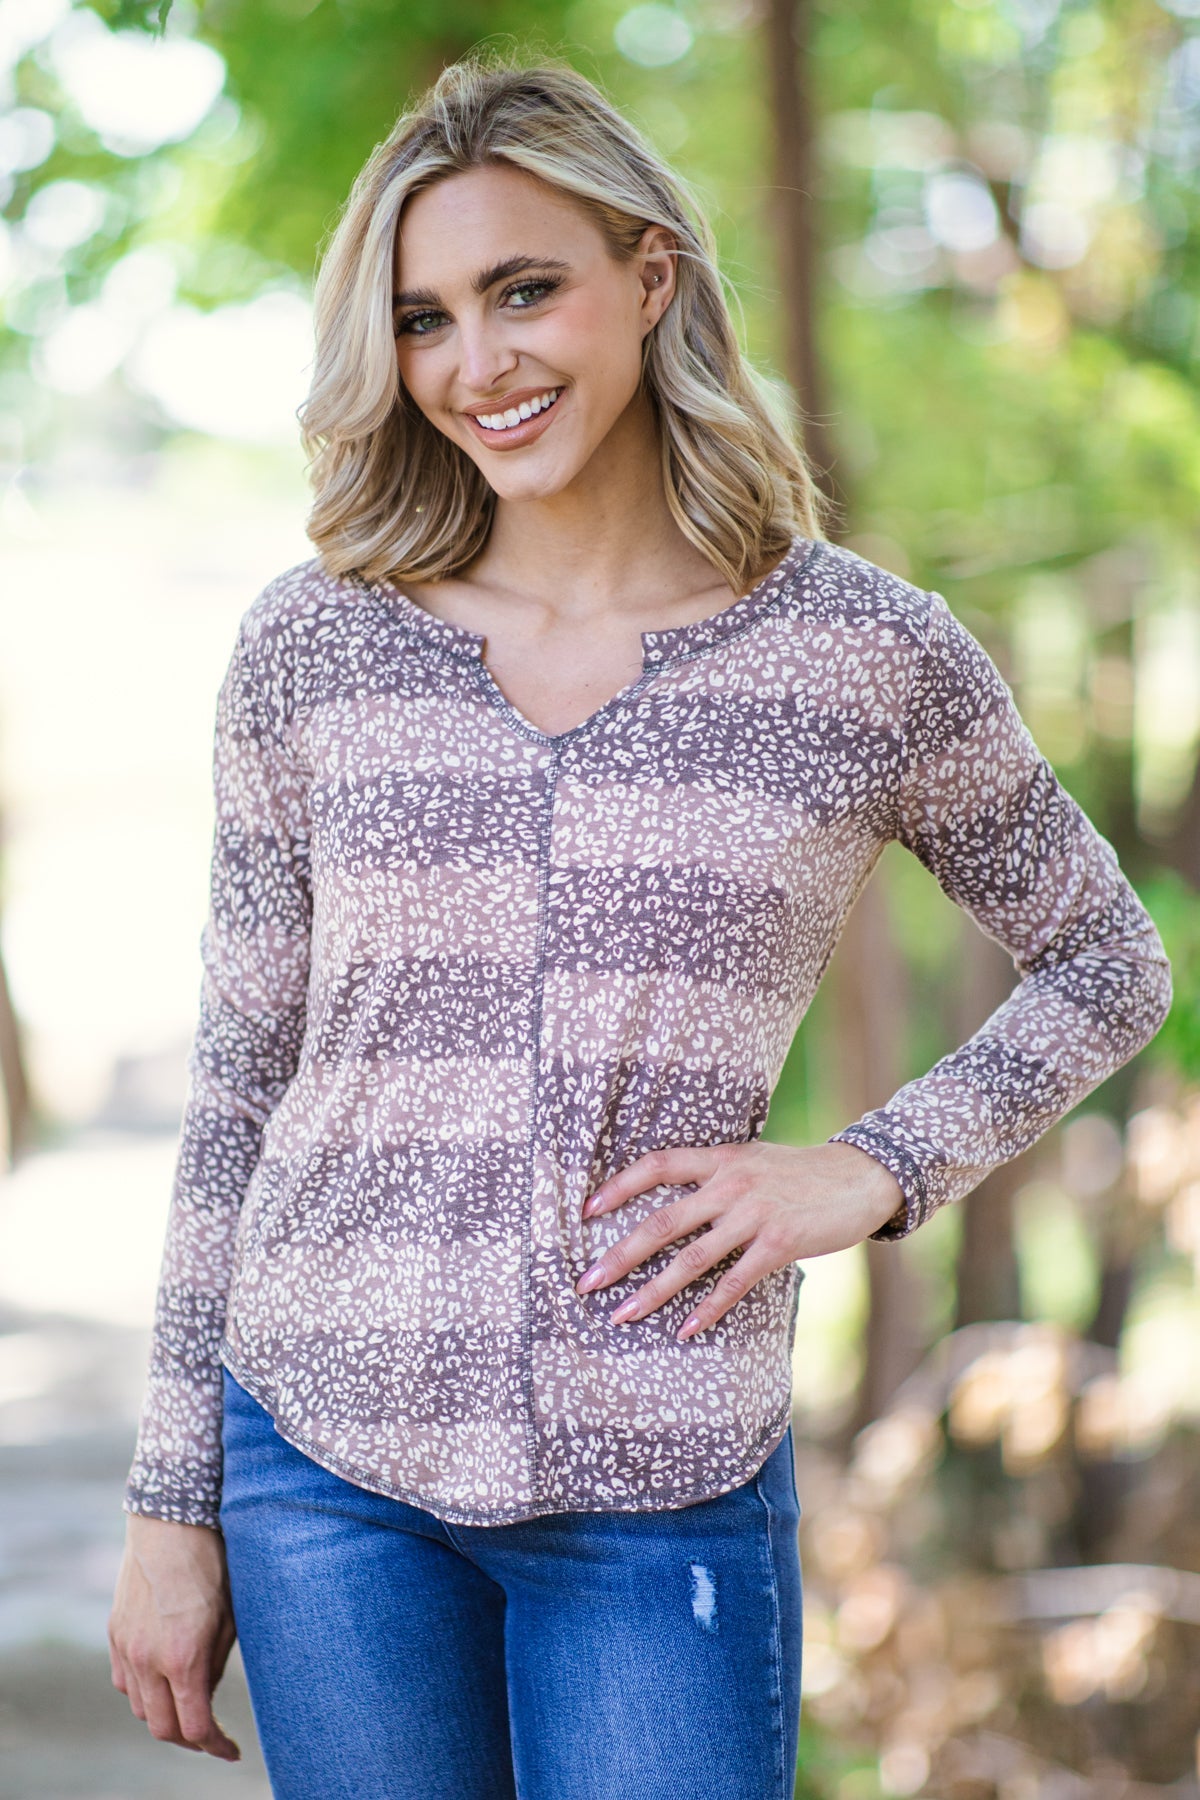 Mauve and Dusty Rose Stripe Animal Print Top - Filly Flair